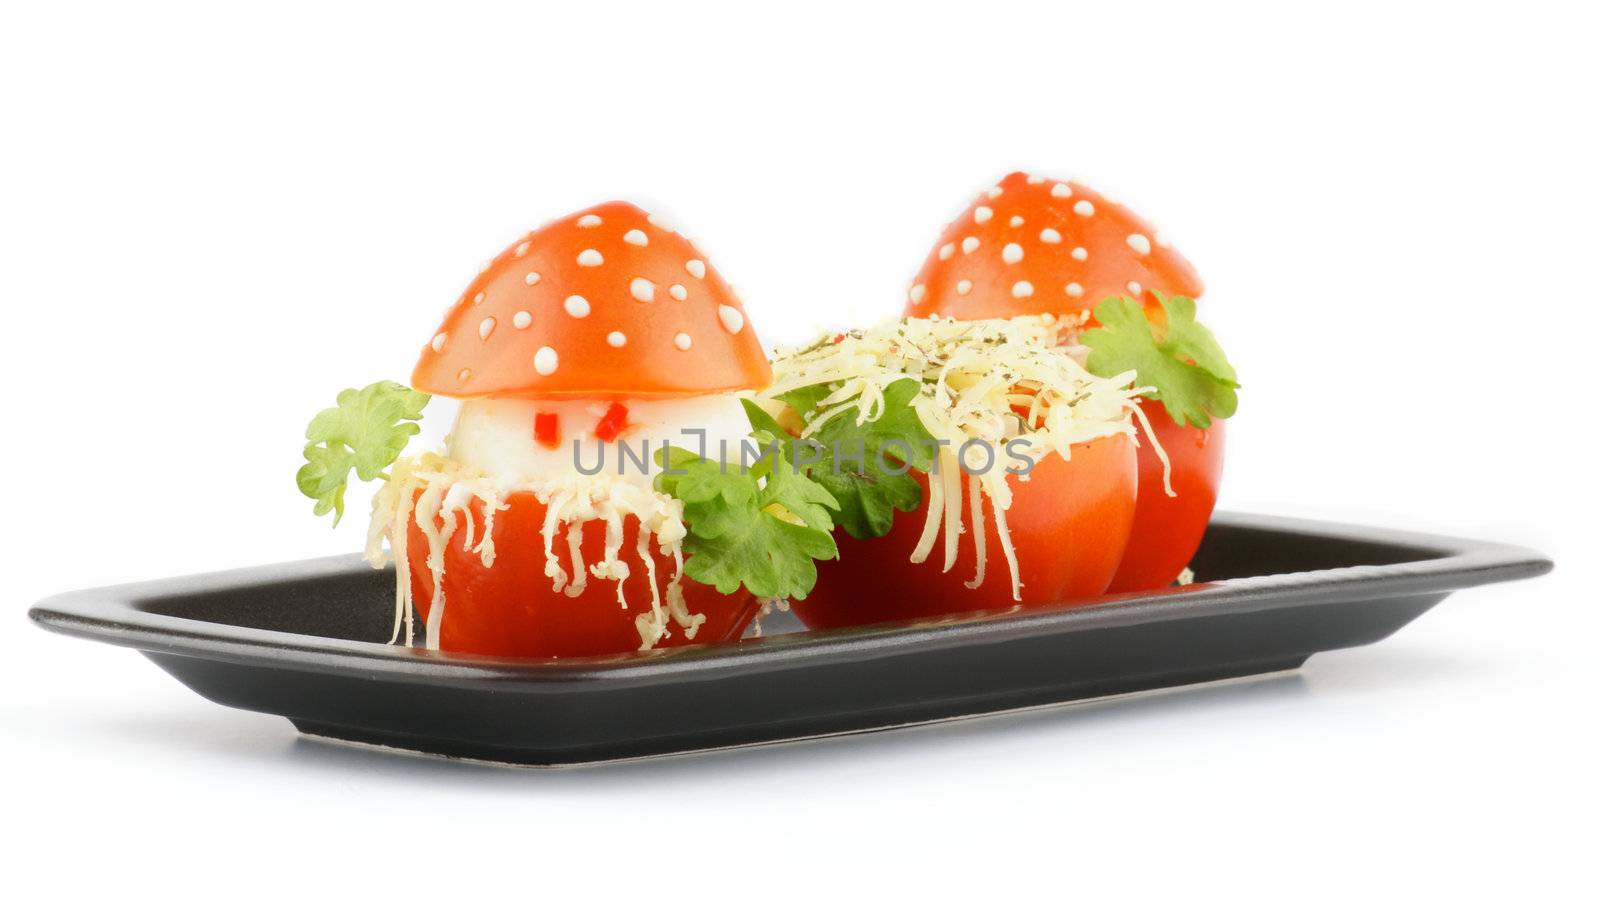 Fly mushroom formed from boiled egg, cheese and cover with the  mayonnaise. Funny food for children or party.